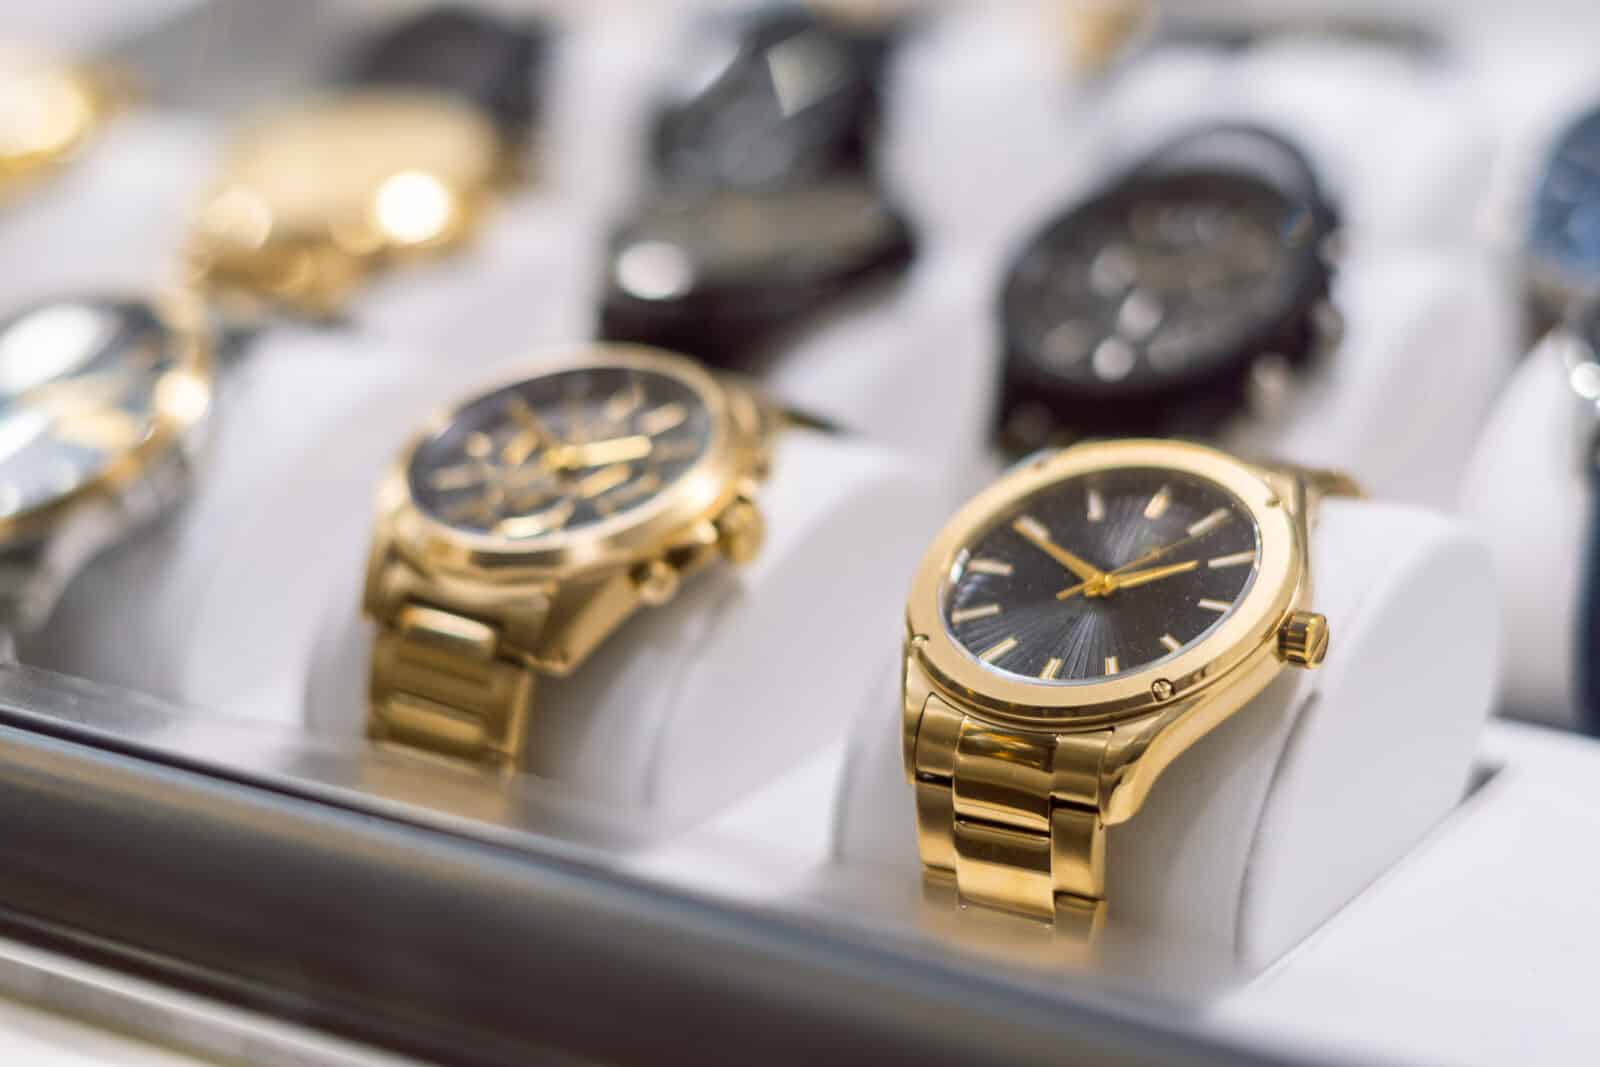 Luxury watch brands competing with technological innovation